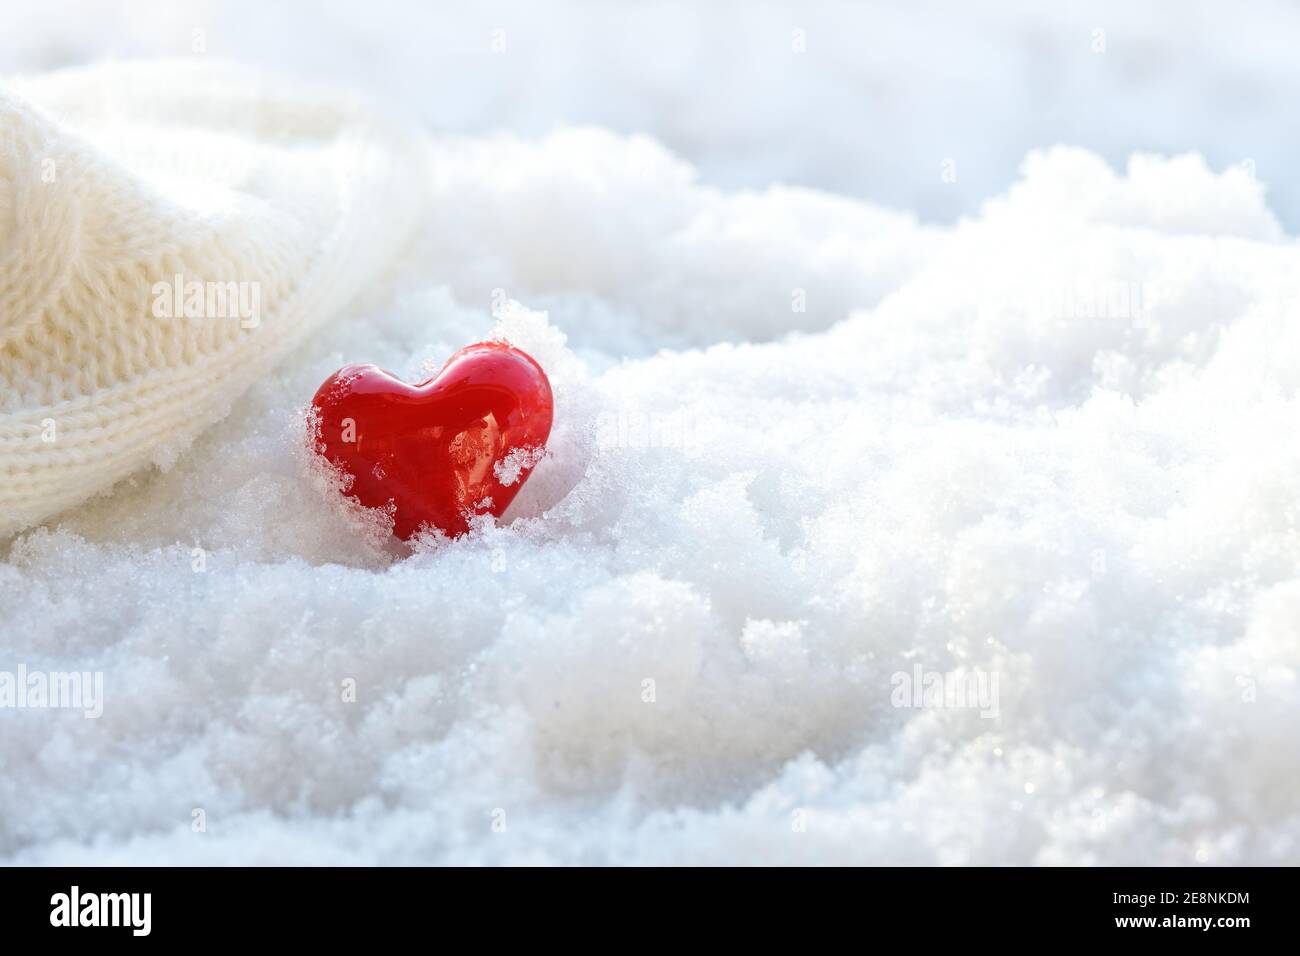 Red heart shape made from glass beside a woolen scarf in the white snow, love symbol and winter holiday concept, copy space, selected focus, narrow de Stock Photo